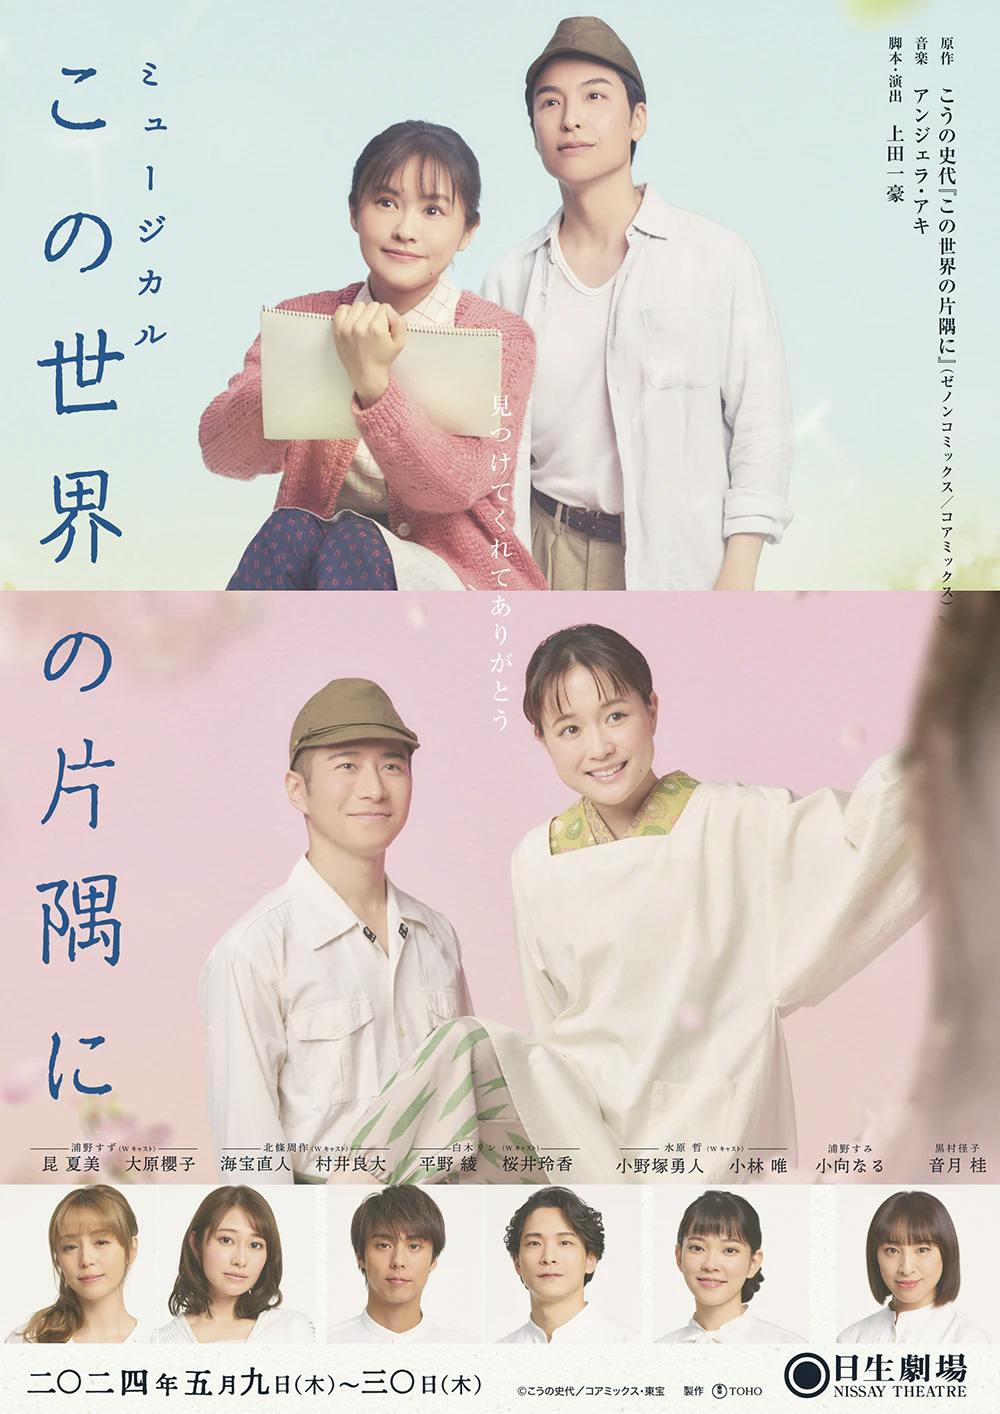 Musical “In This Corner of the World” visuals unveiled and all cast announced!　